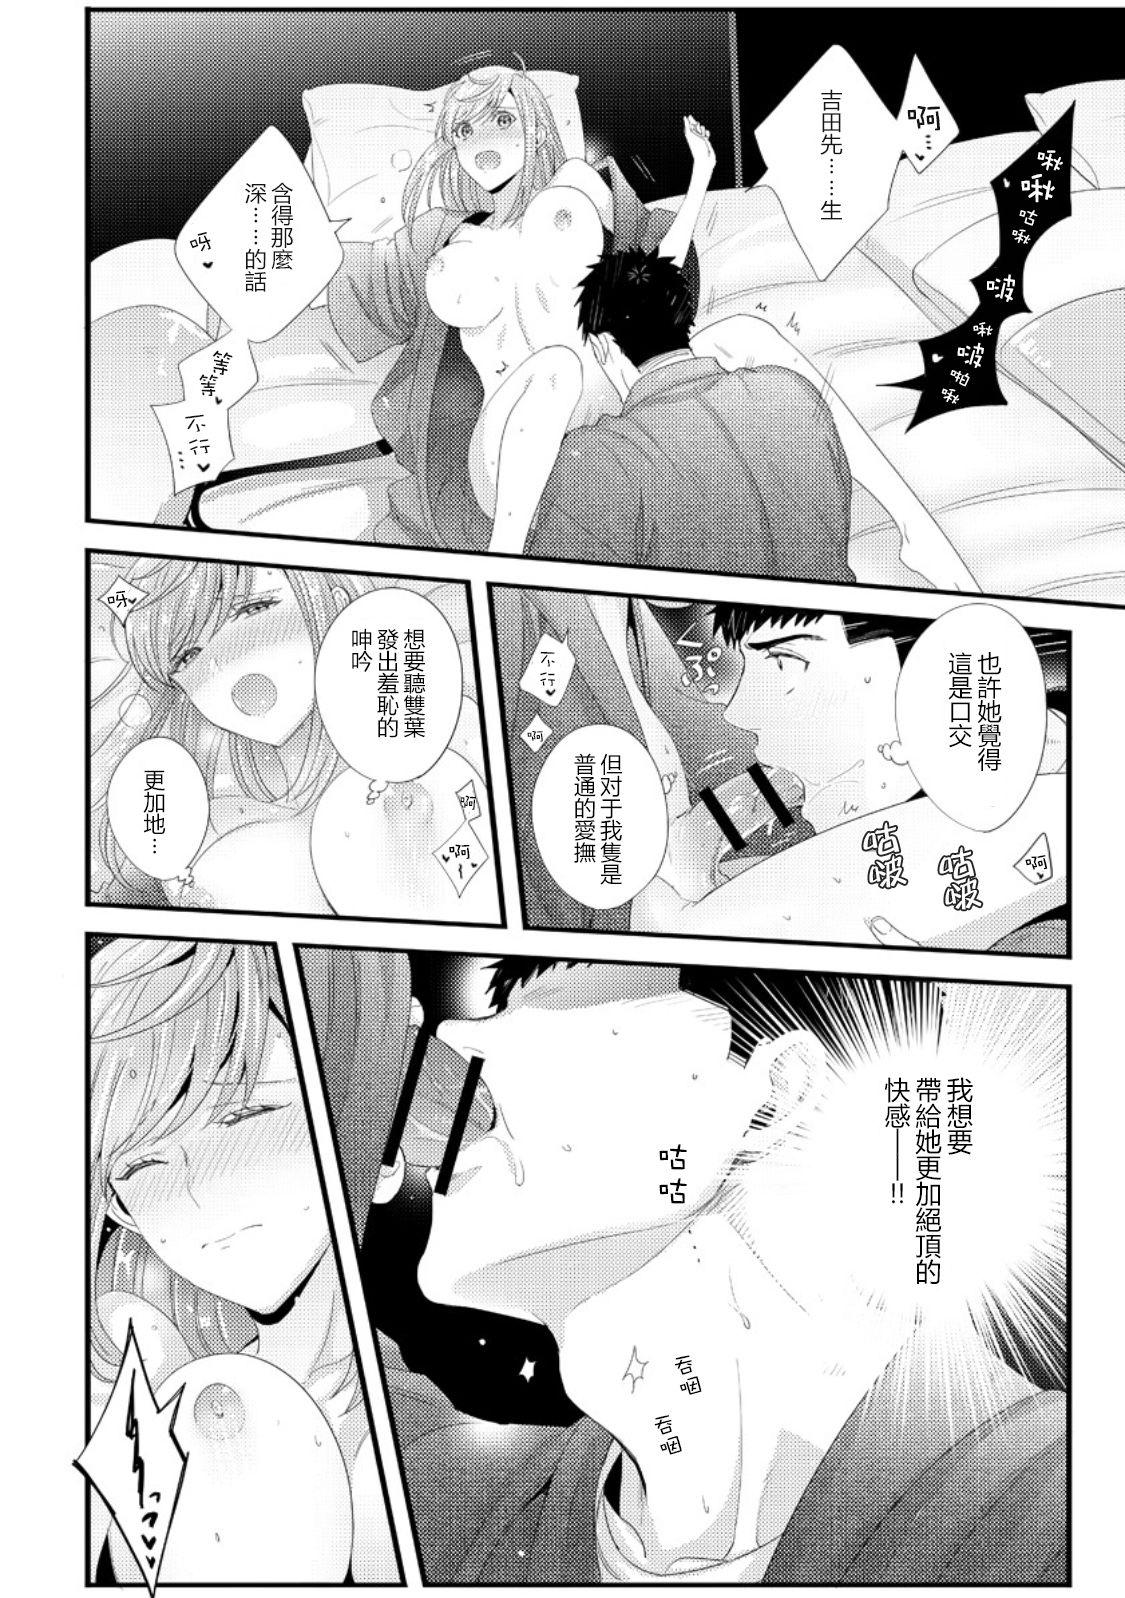 Please Let Me Hold You Futaba-San! Ch.1 20